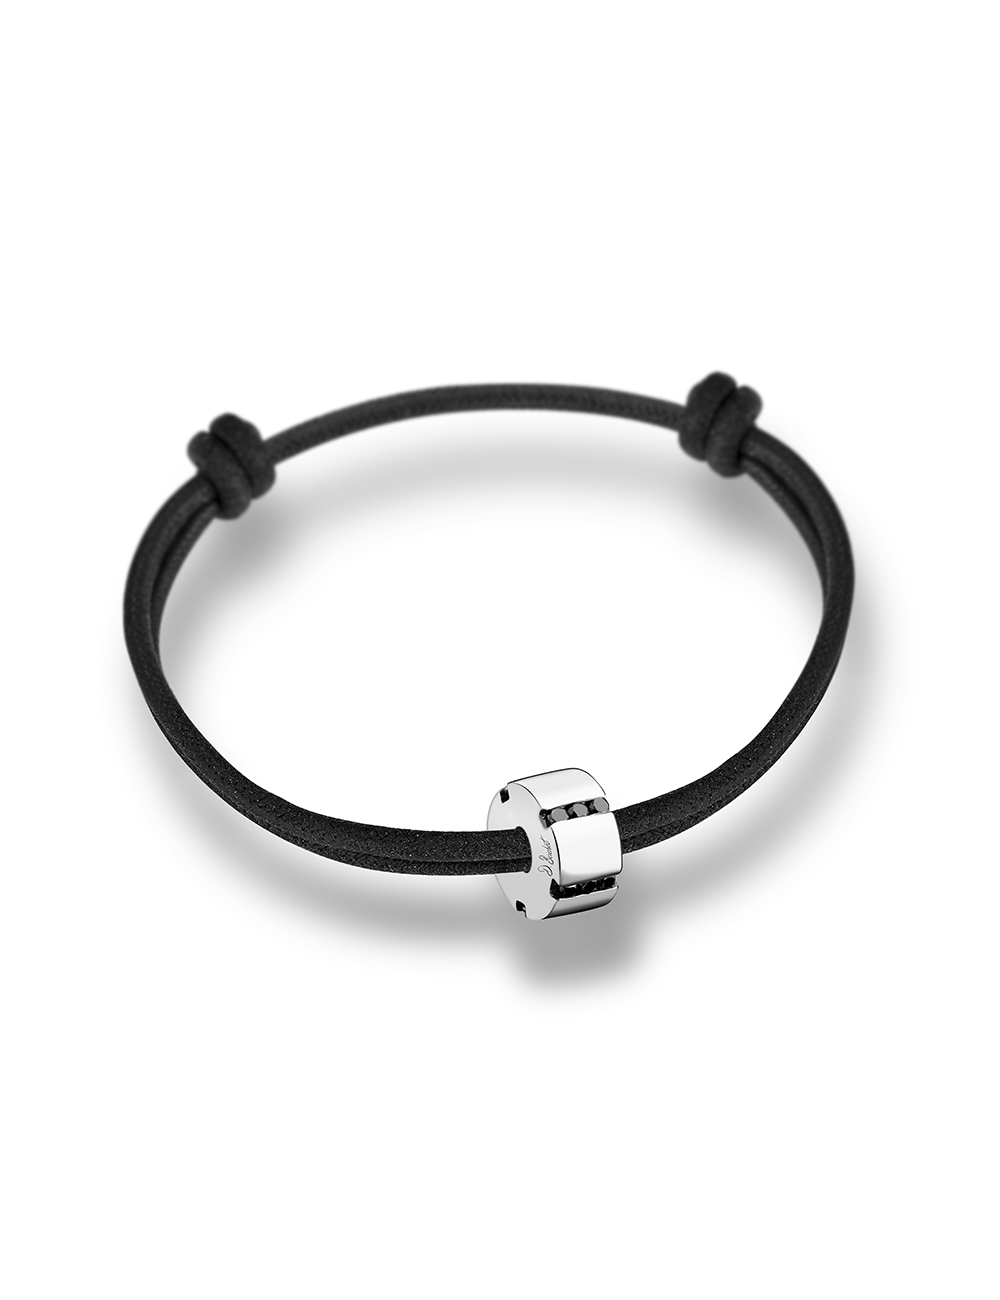 A modern bracelet for men in white gold 18k and black diamonds on a black cord with sliding knots